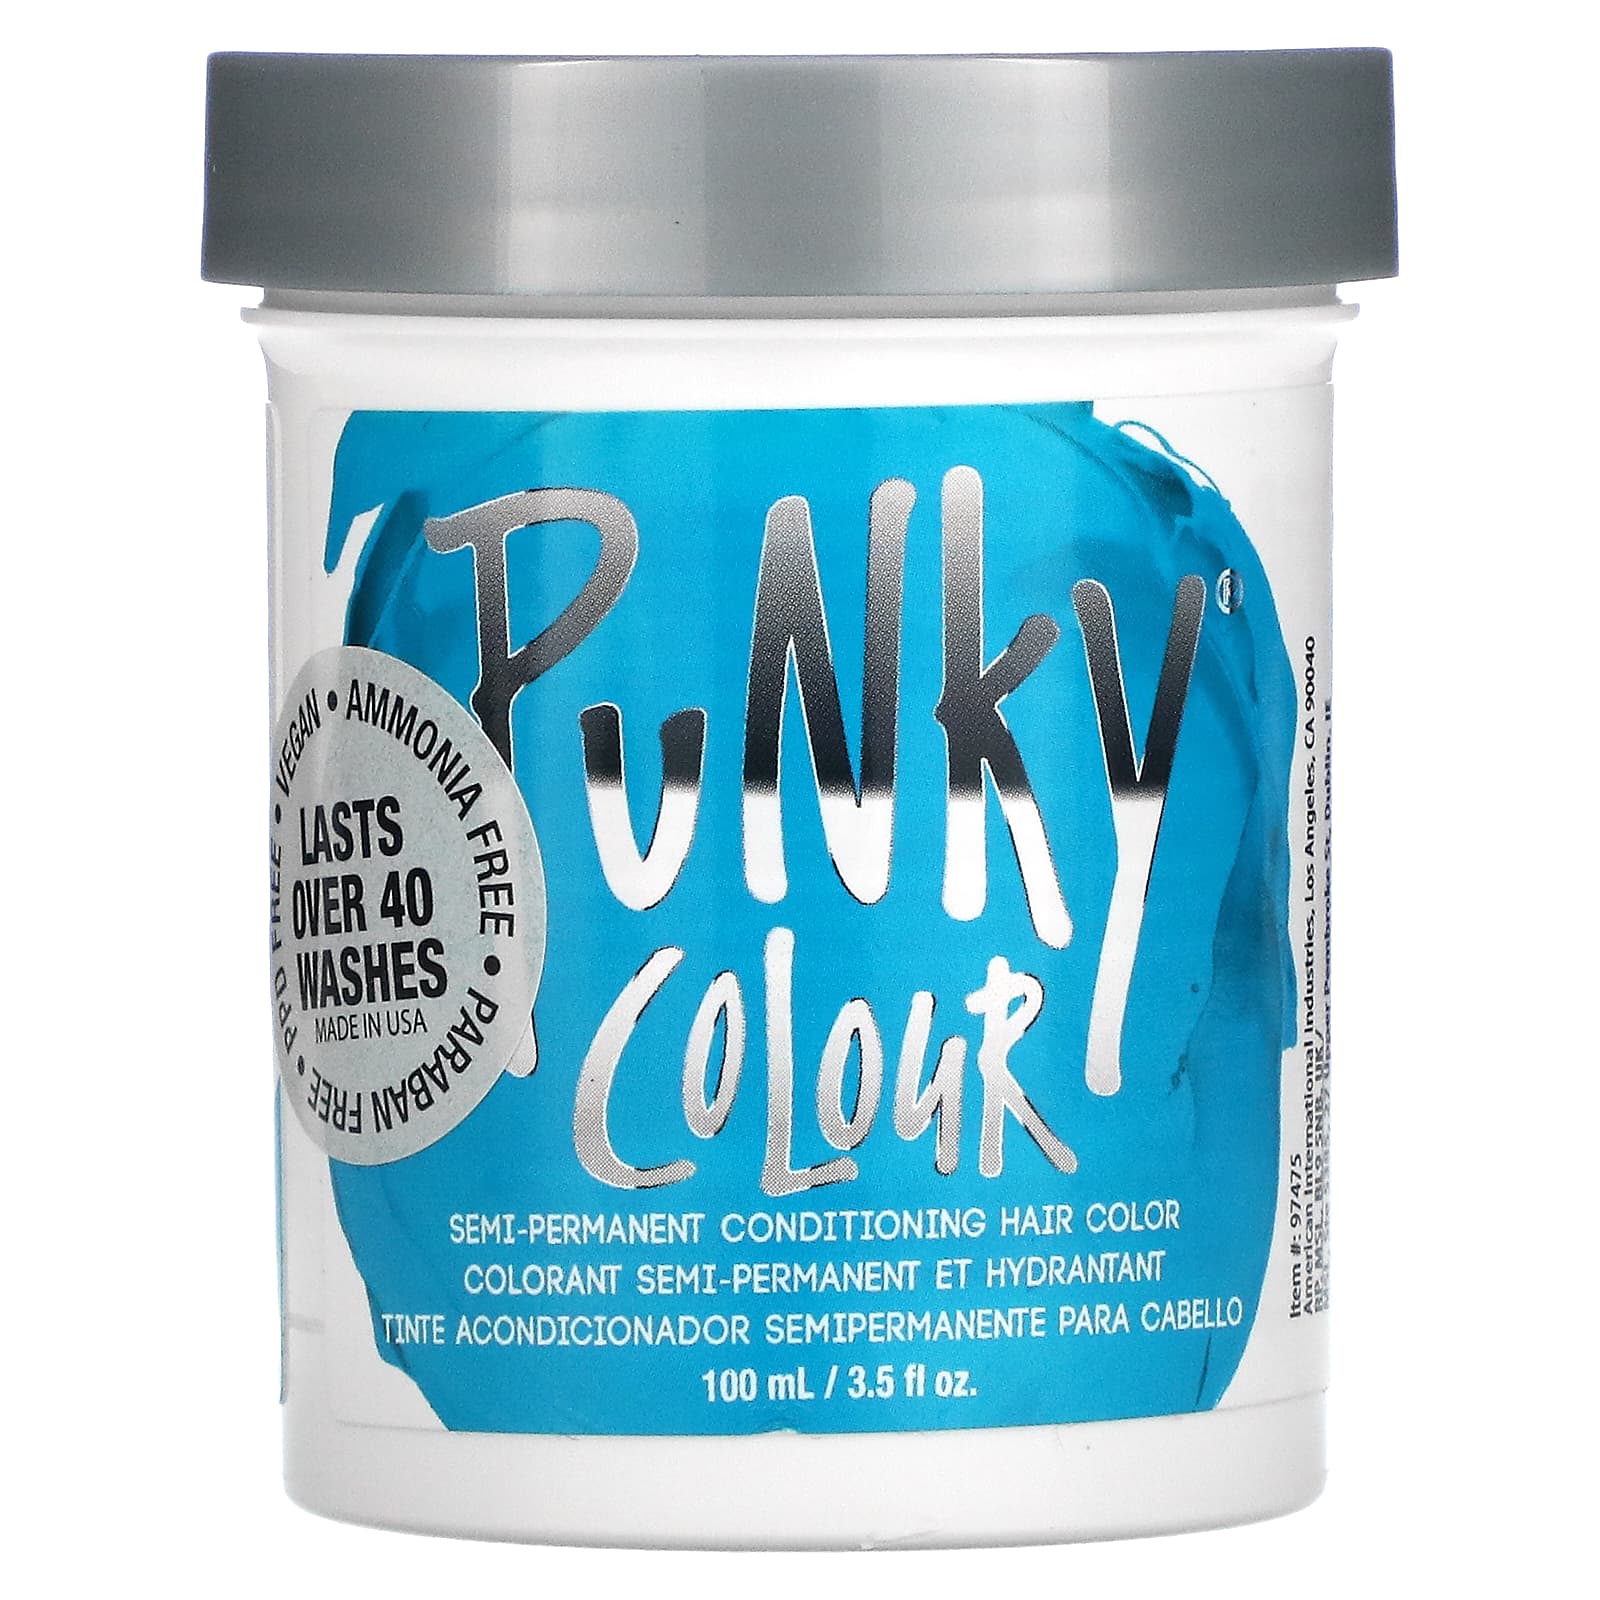 Punky Colour, Semi-Permanent Conditioning Hair Color, Turquoise,  fl oz  (100 ml)